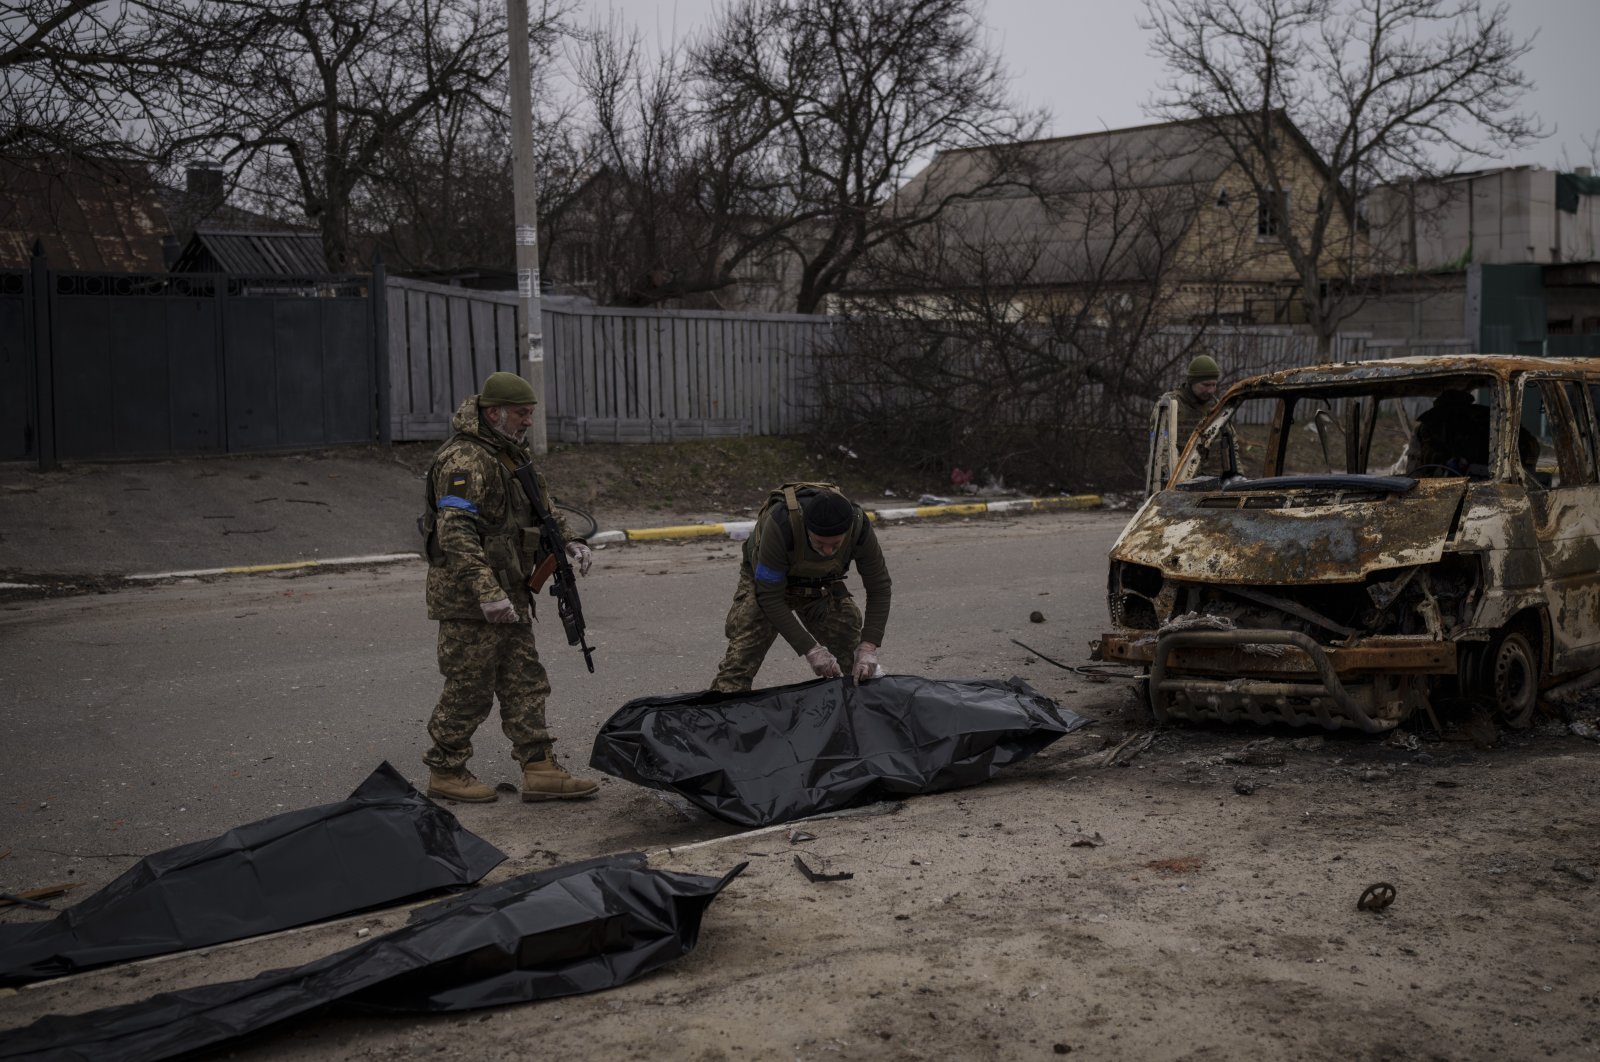 Ukrainian soldiers recover the remains of four killed civilians from inside a charred vehicle in Bucha, outskirts of Kyiv, Ukraine, Tuesday, April 5, 2022. (AP Photo)